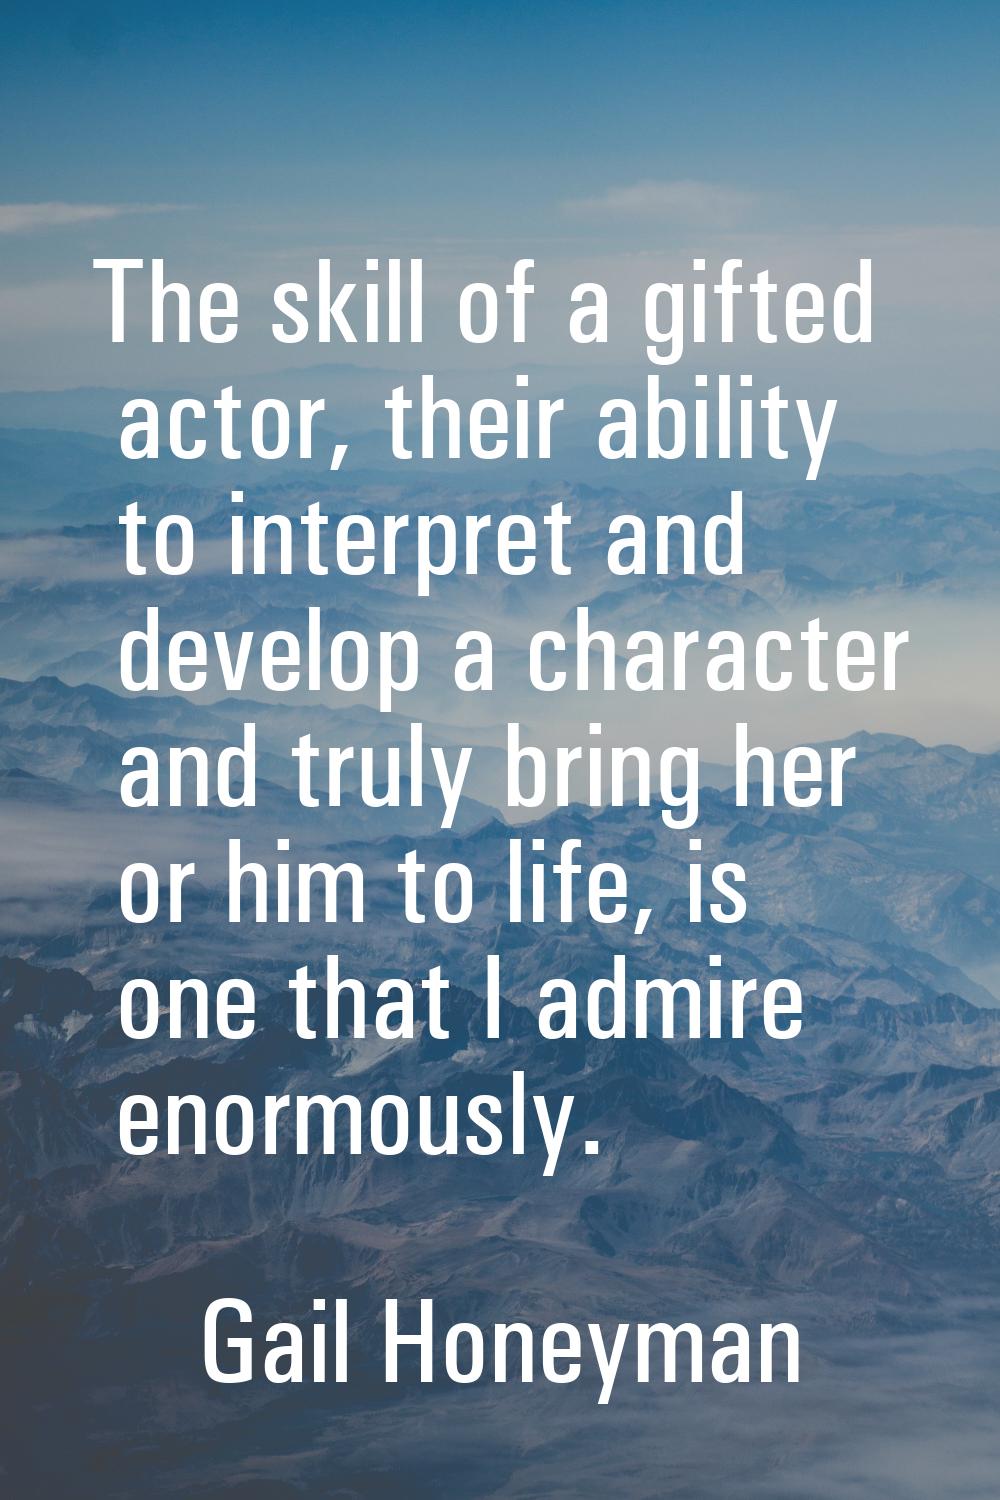 The skill of a gifted actor, their ability to interpret and develop a character and truly bring her